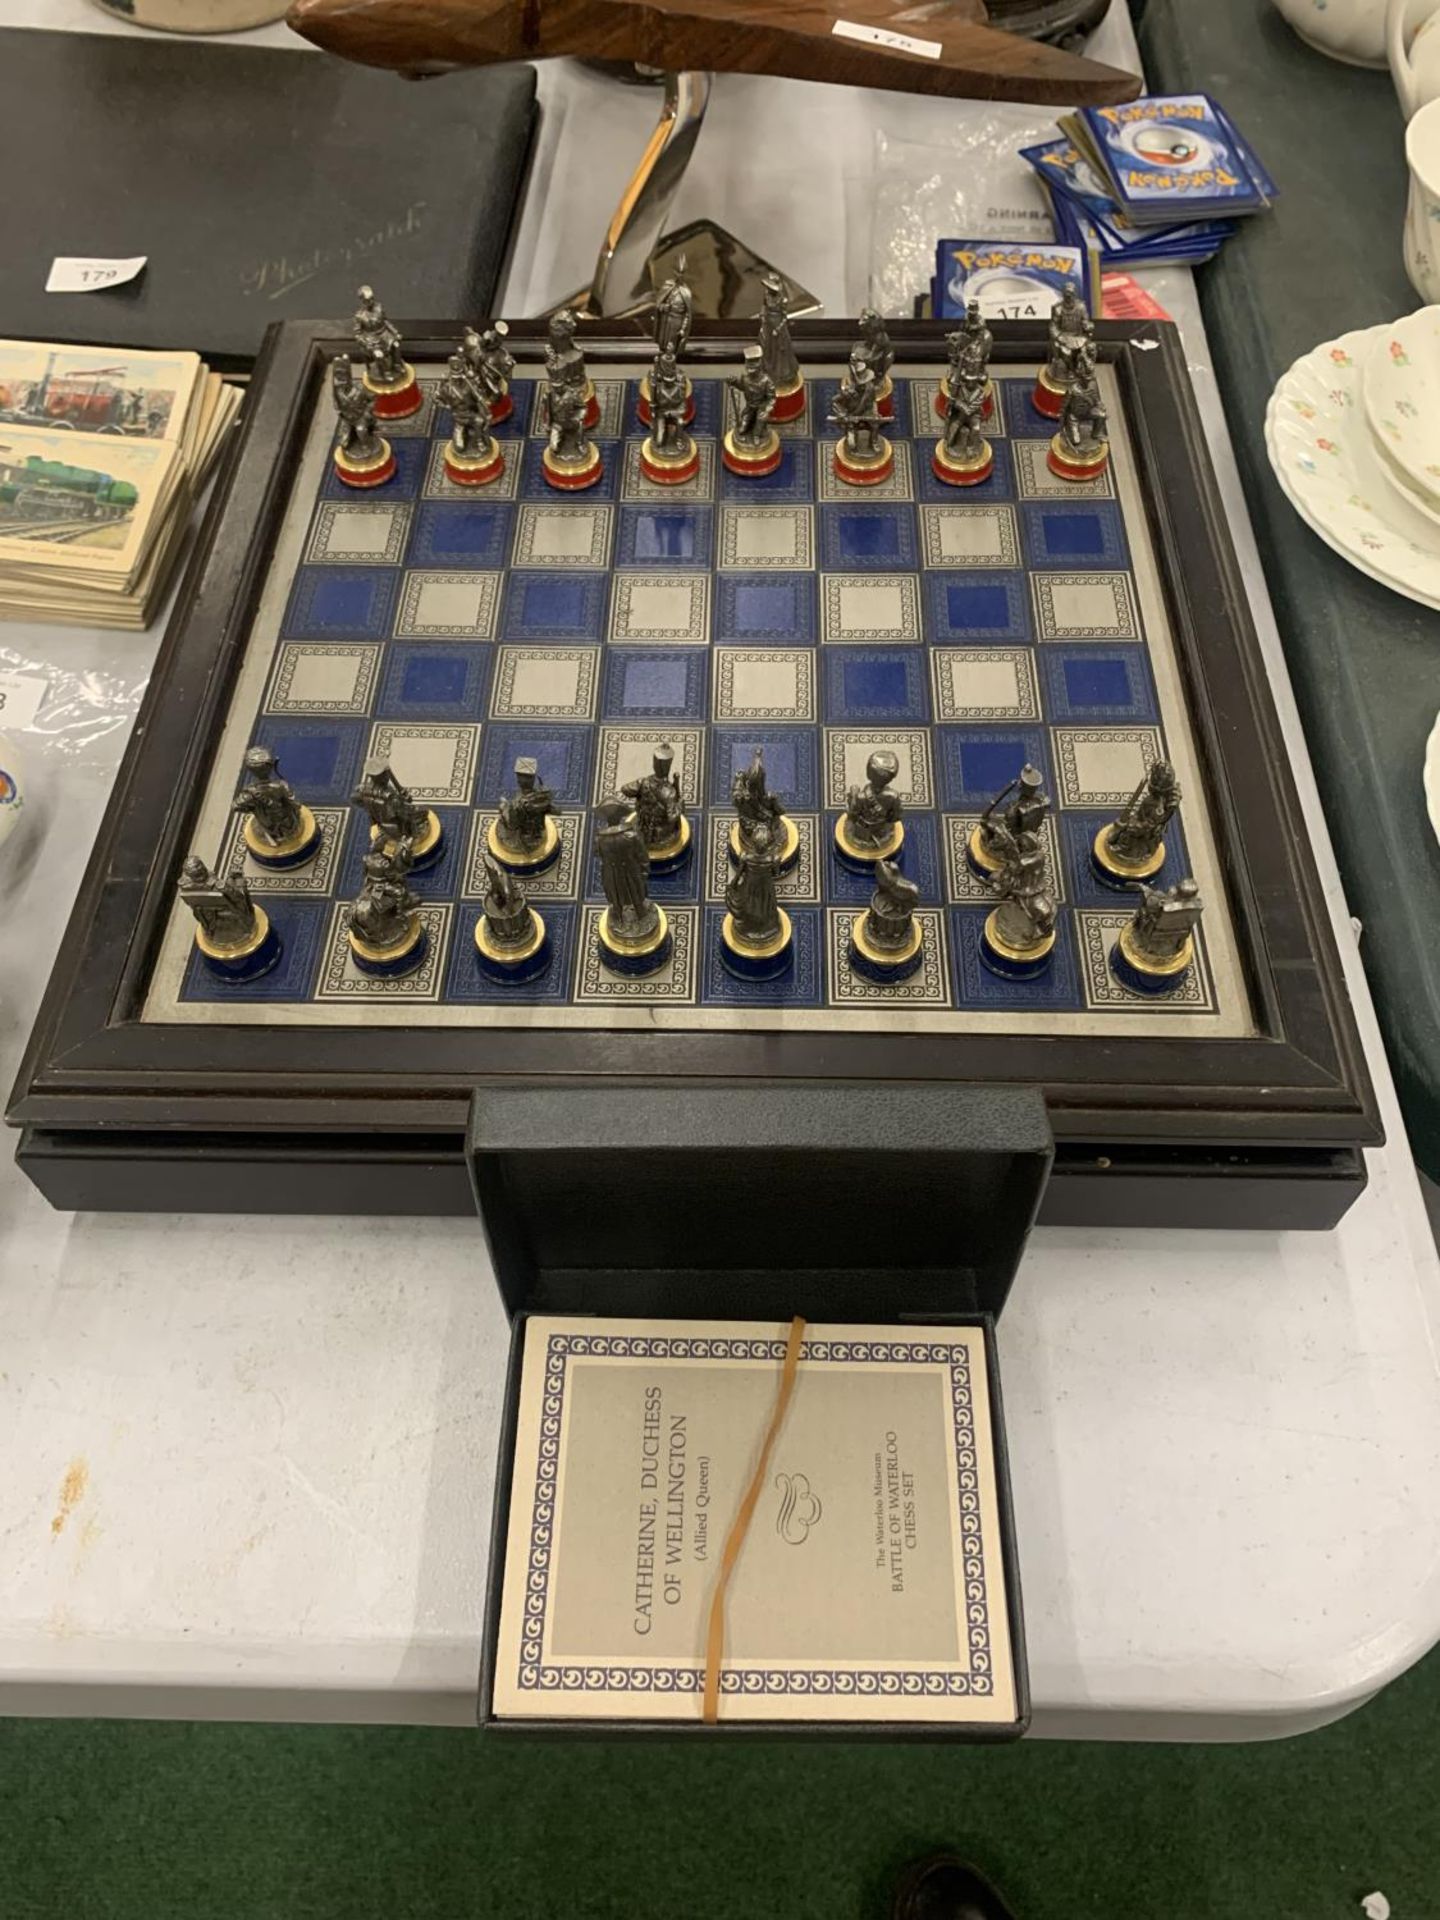 A FRANKLIN MINT BATTLE OF WATERLOO CHESS SET WITH PIECE DESCRIPTION CARDS AND PEWTER AND BRASS